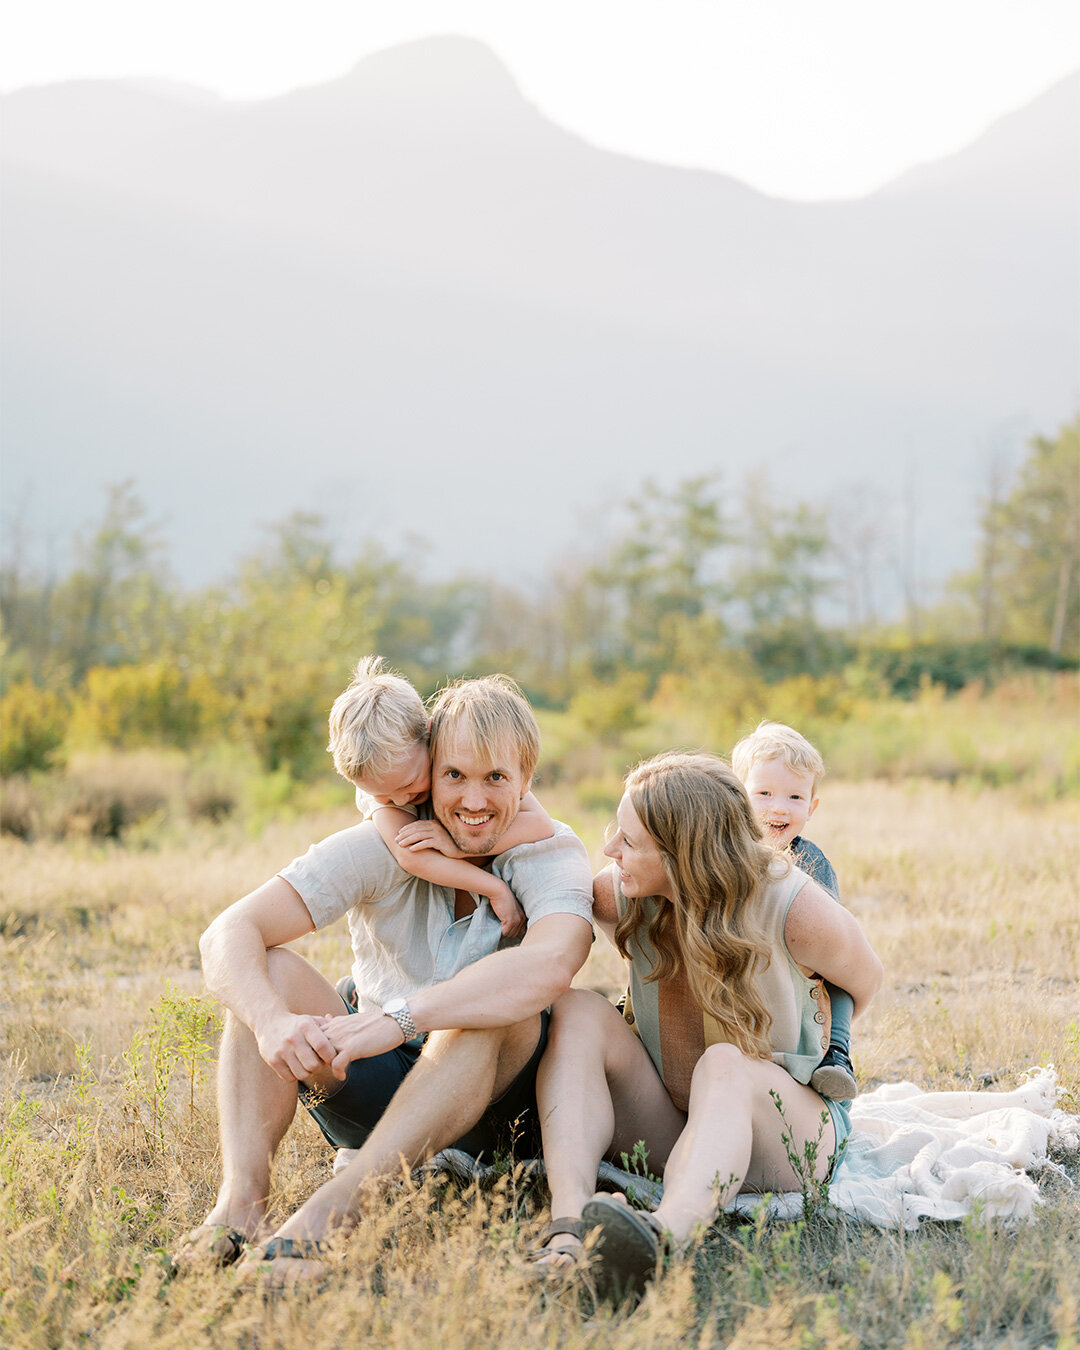 Happy Family Day friends, hope the weekend was filled with many special family memories 🥰
.
.
.
.
.
#vancouverphotographer #vancouverfamilyphotographer #whistlerfamilyphotography #lightinspired #thehonestlens #liveauthenic #momentsofmine #thesincere